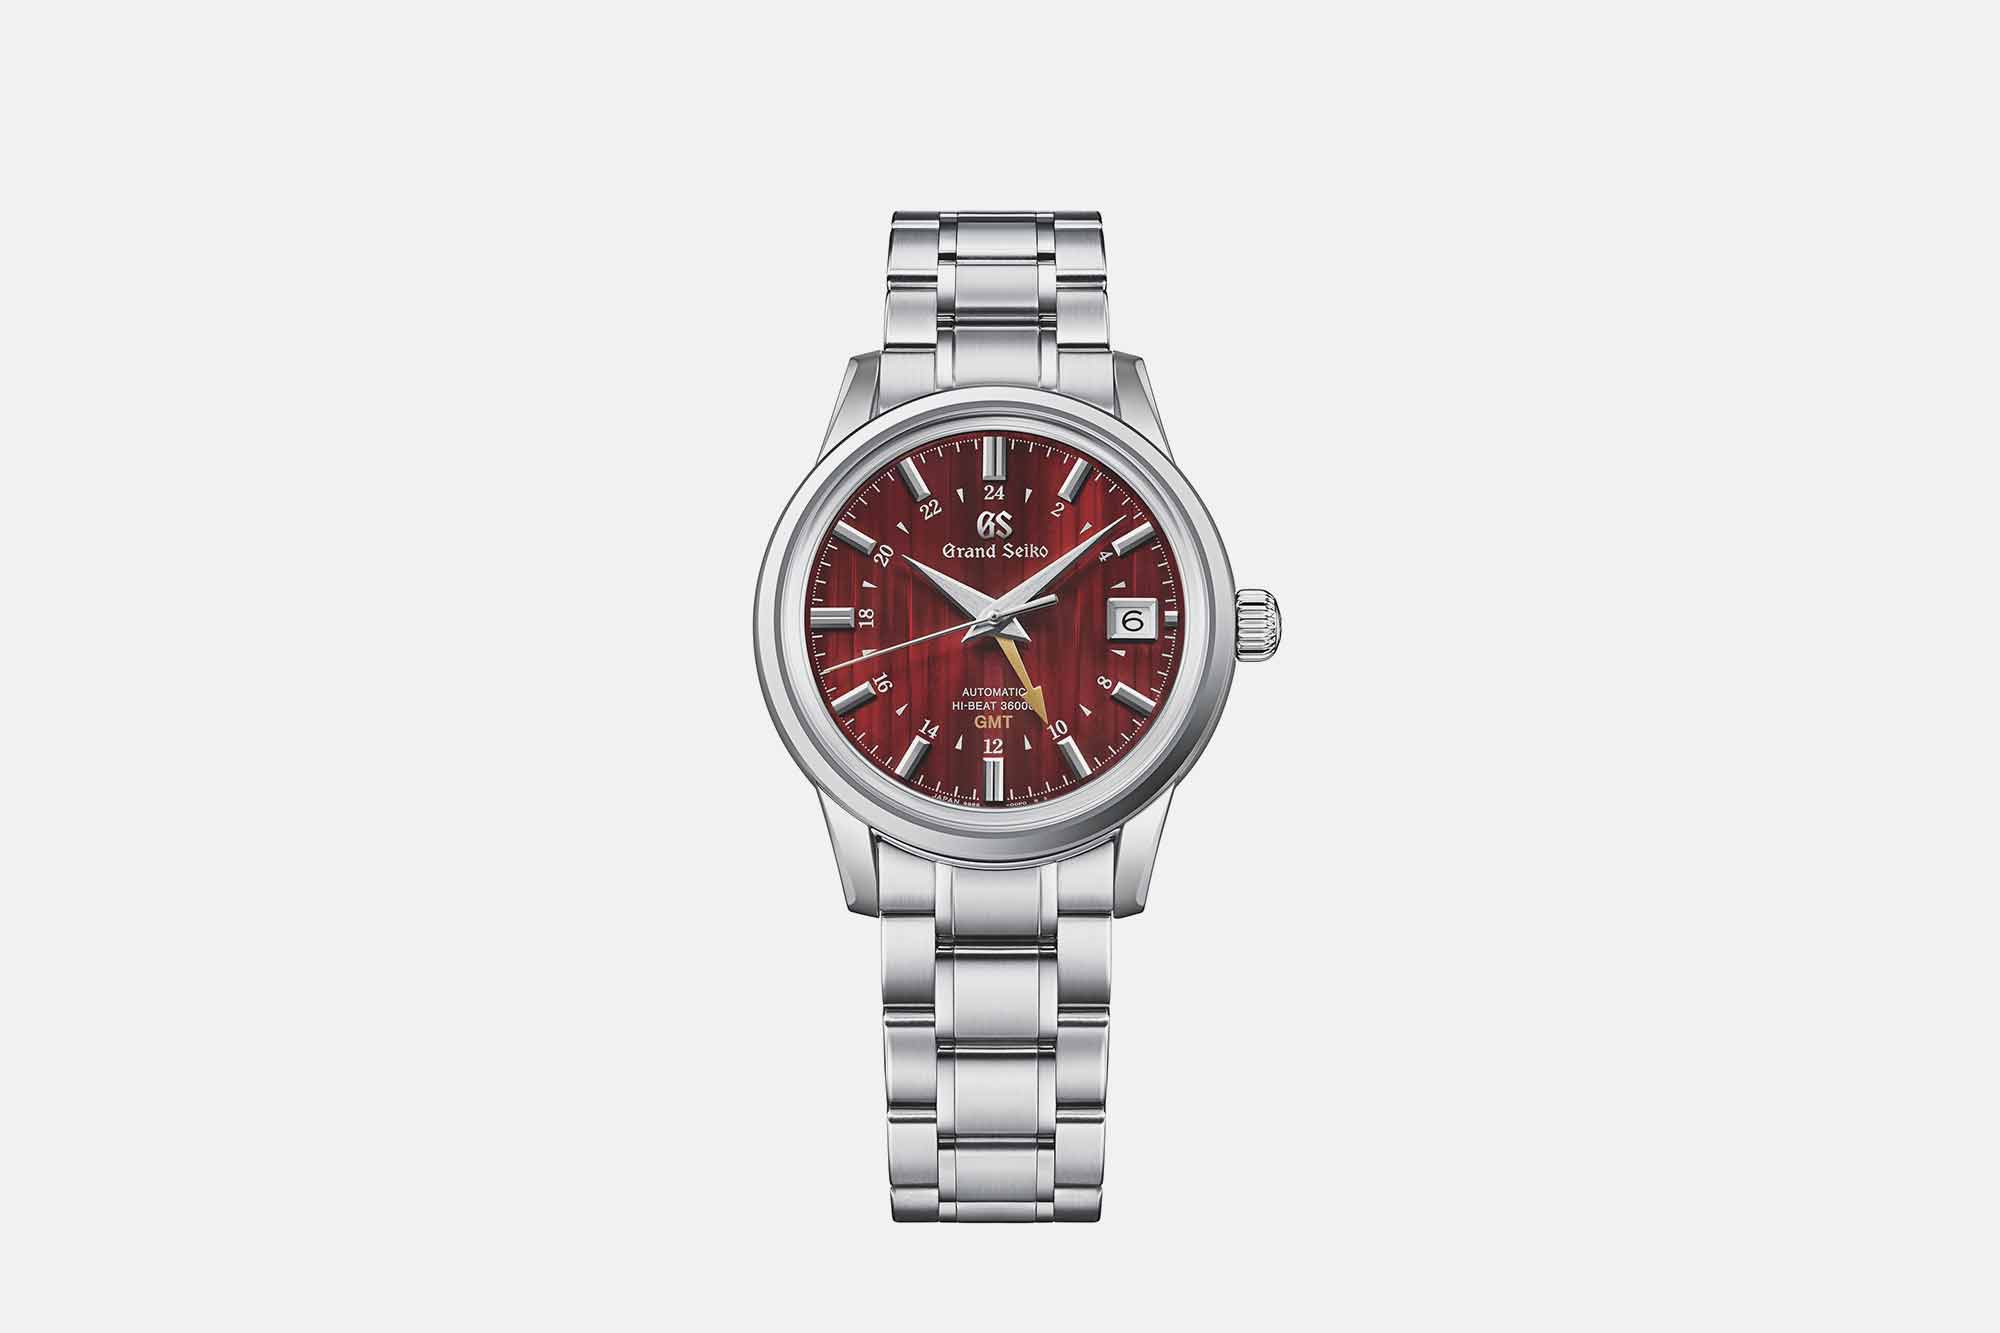 Grand Seiko Returns to an Iconic Red Dial with the SBGJ273